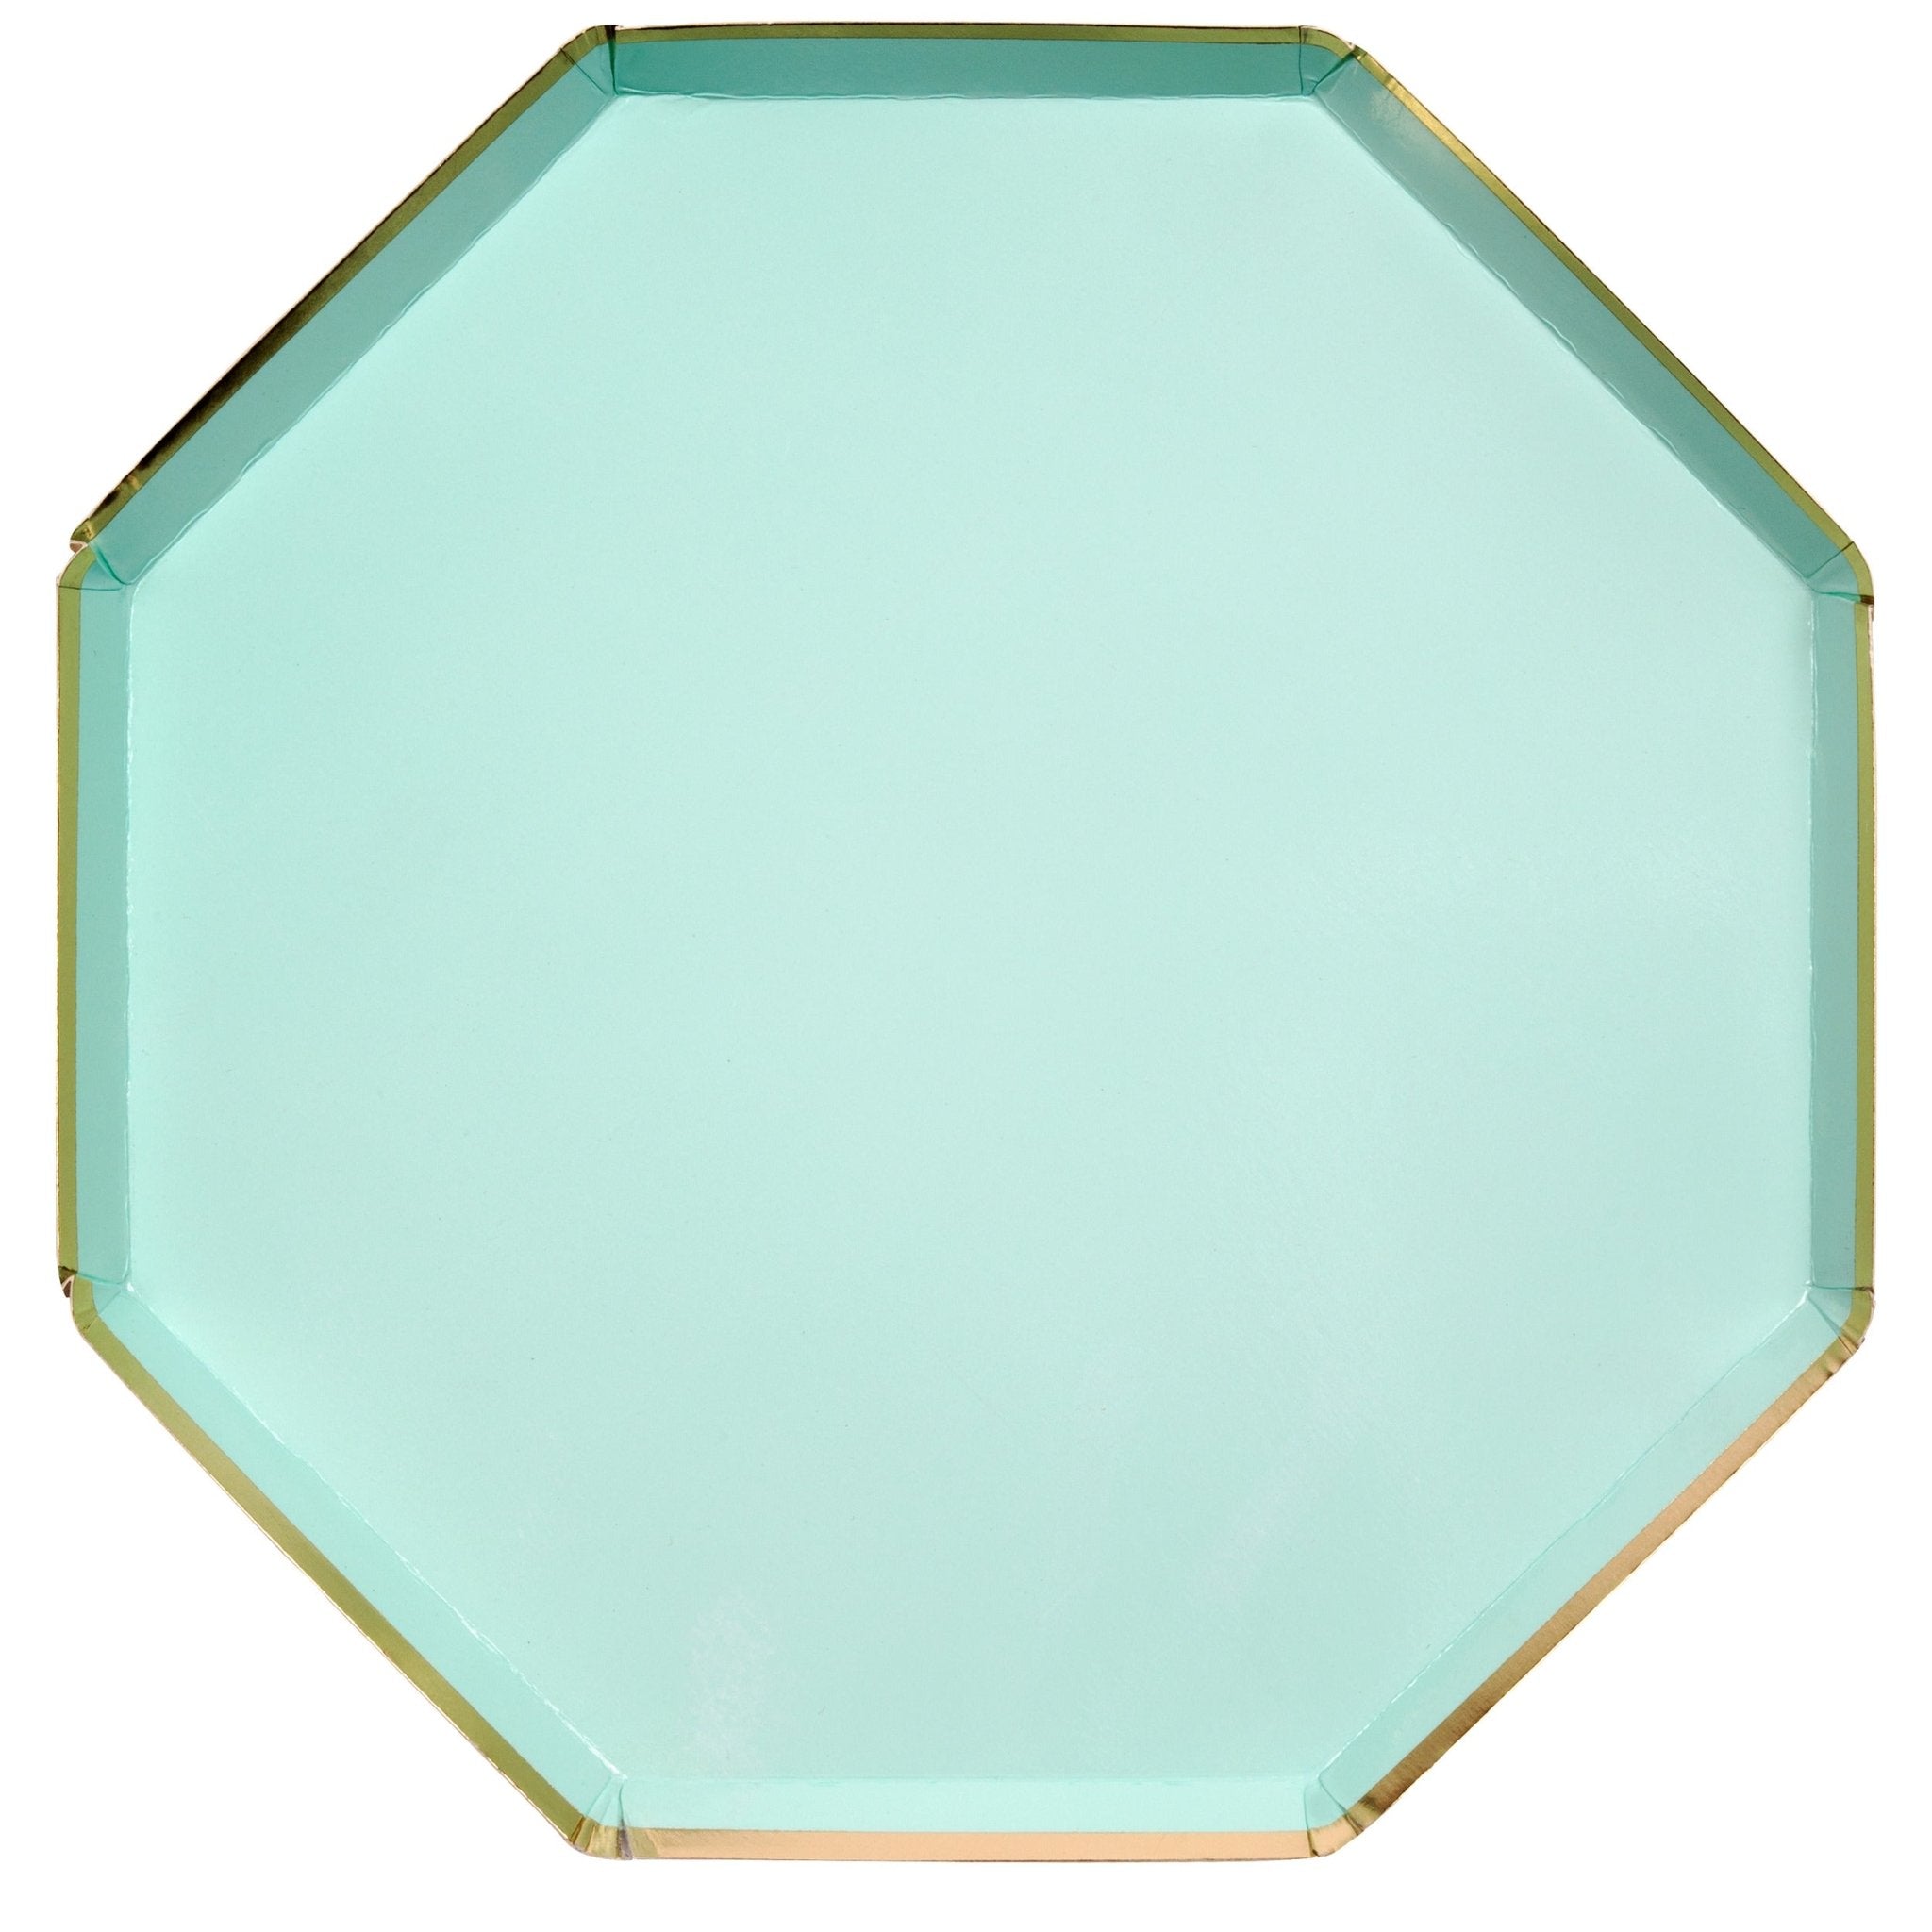 Mint Dinner Paper Plates - Oh My Darling Party Co-bohoboho partybutterfly #Fringe_Backdrop#